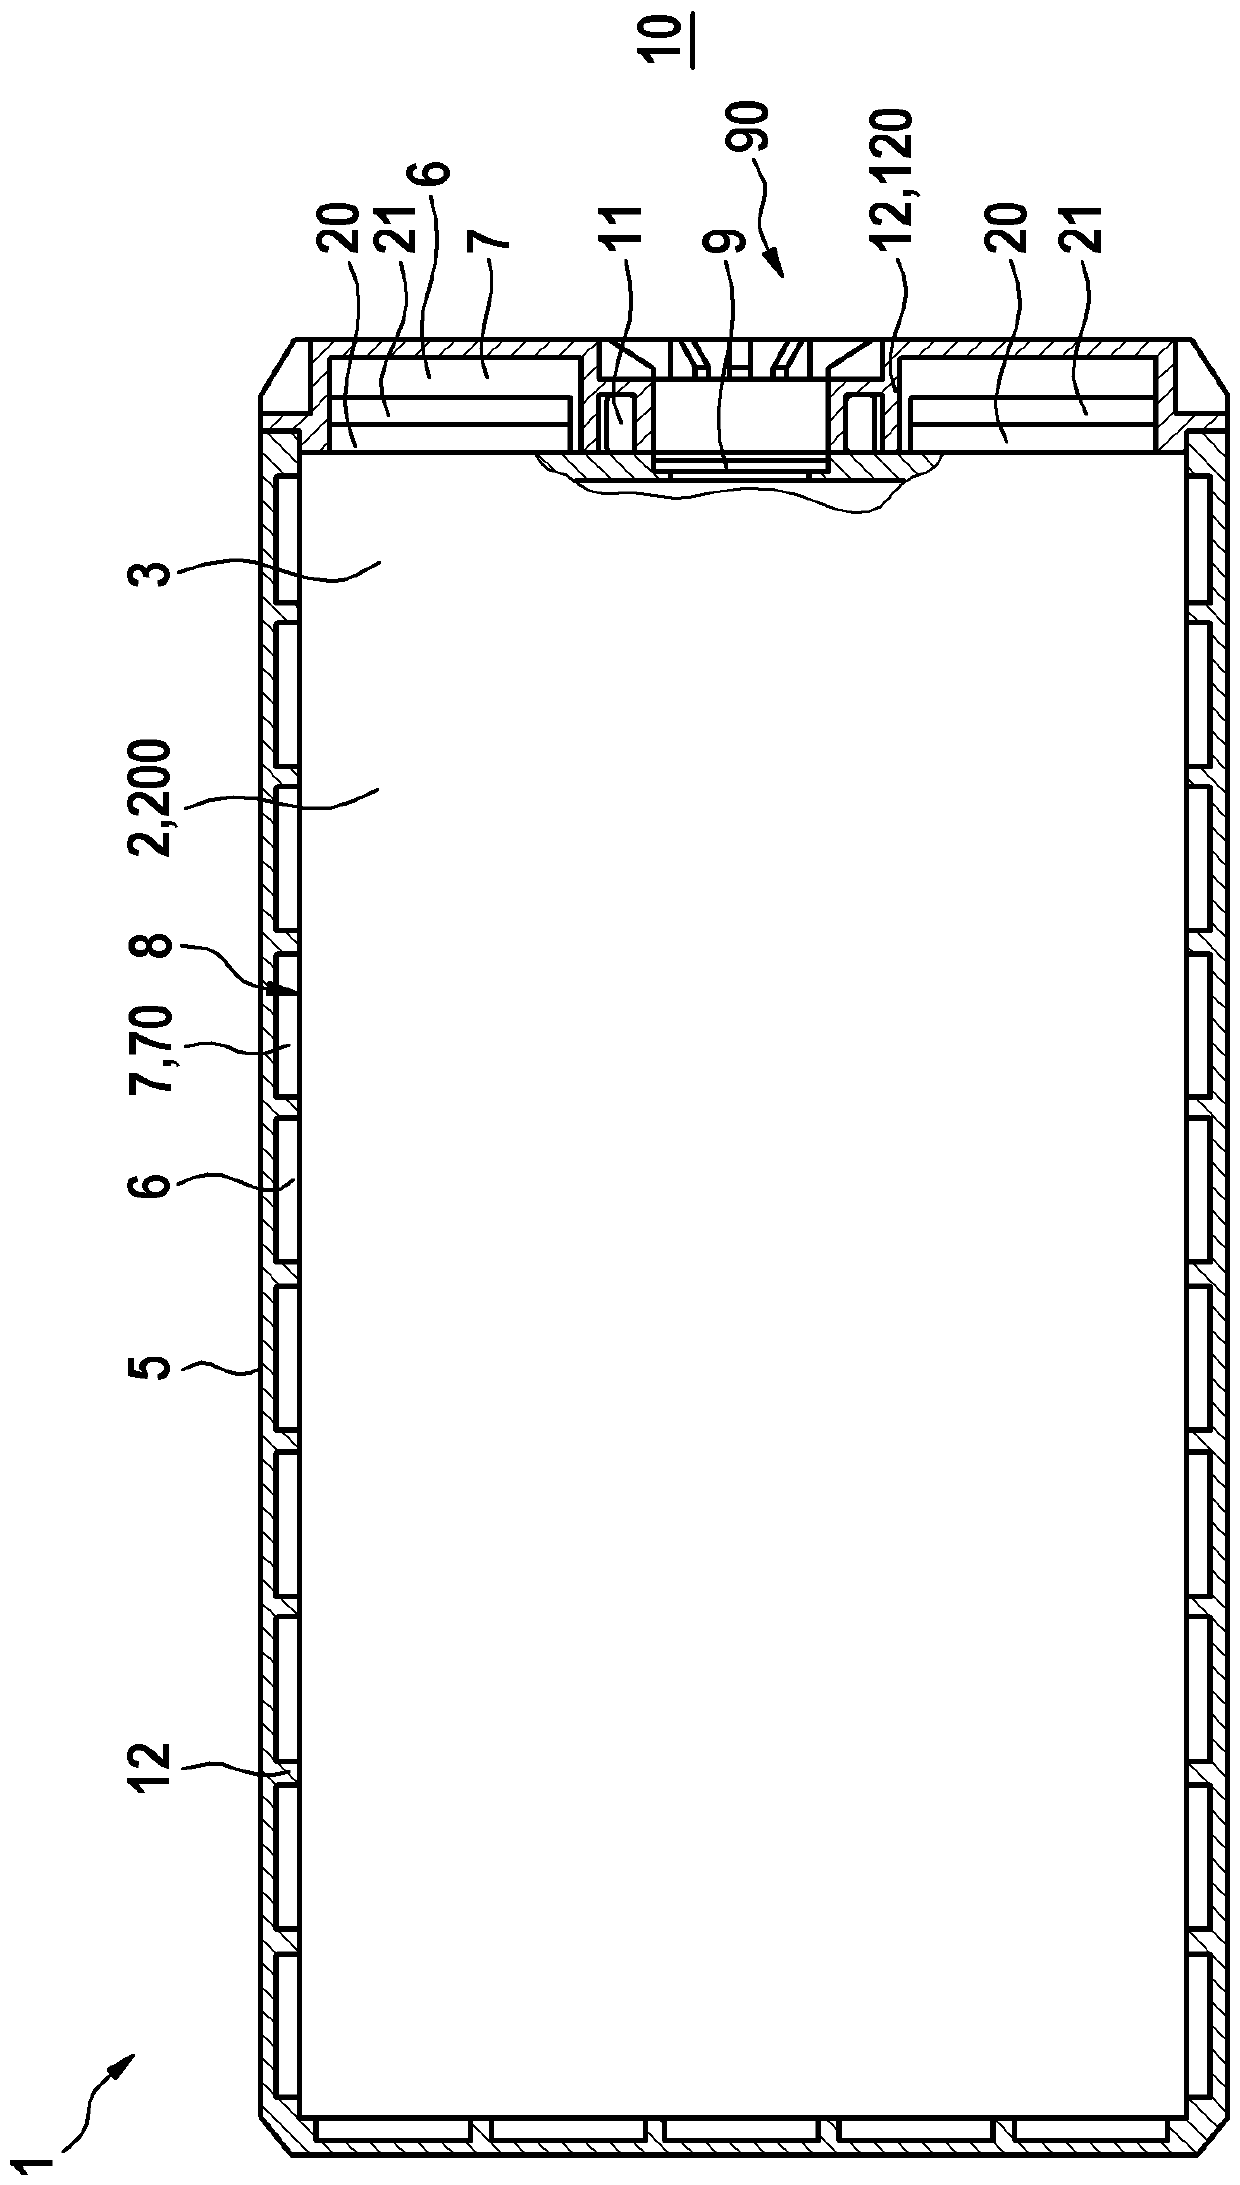 Battery module with a plurality of battery cells